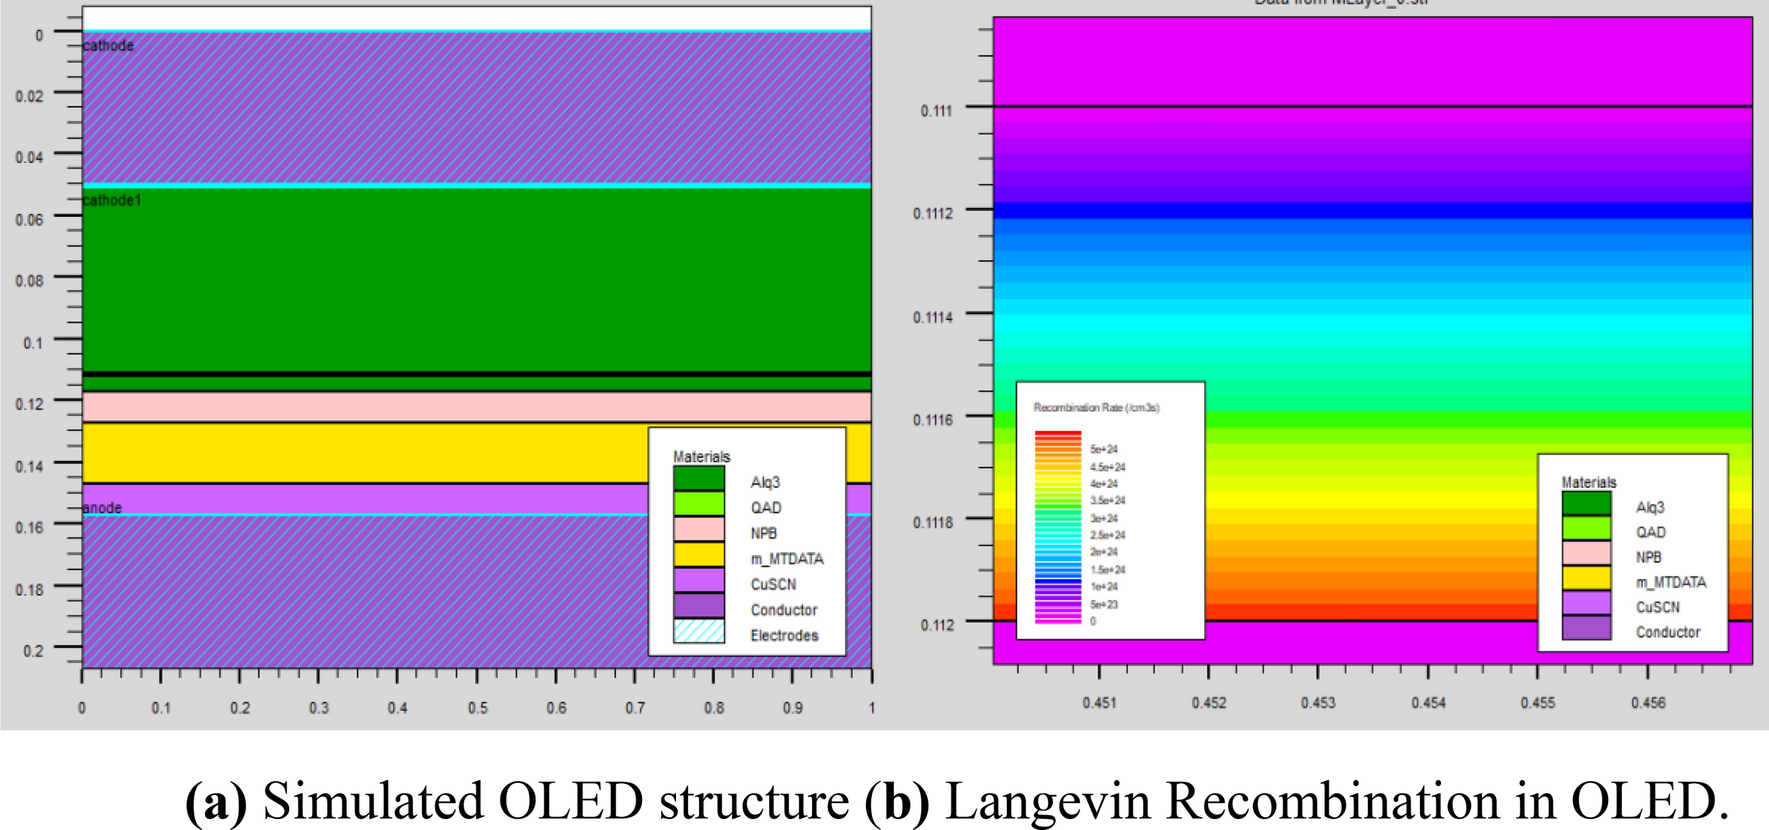 Performance enhancement of OLED employing CuSCN interfacial layer